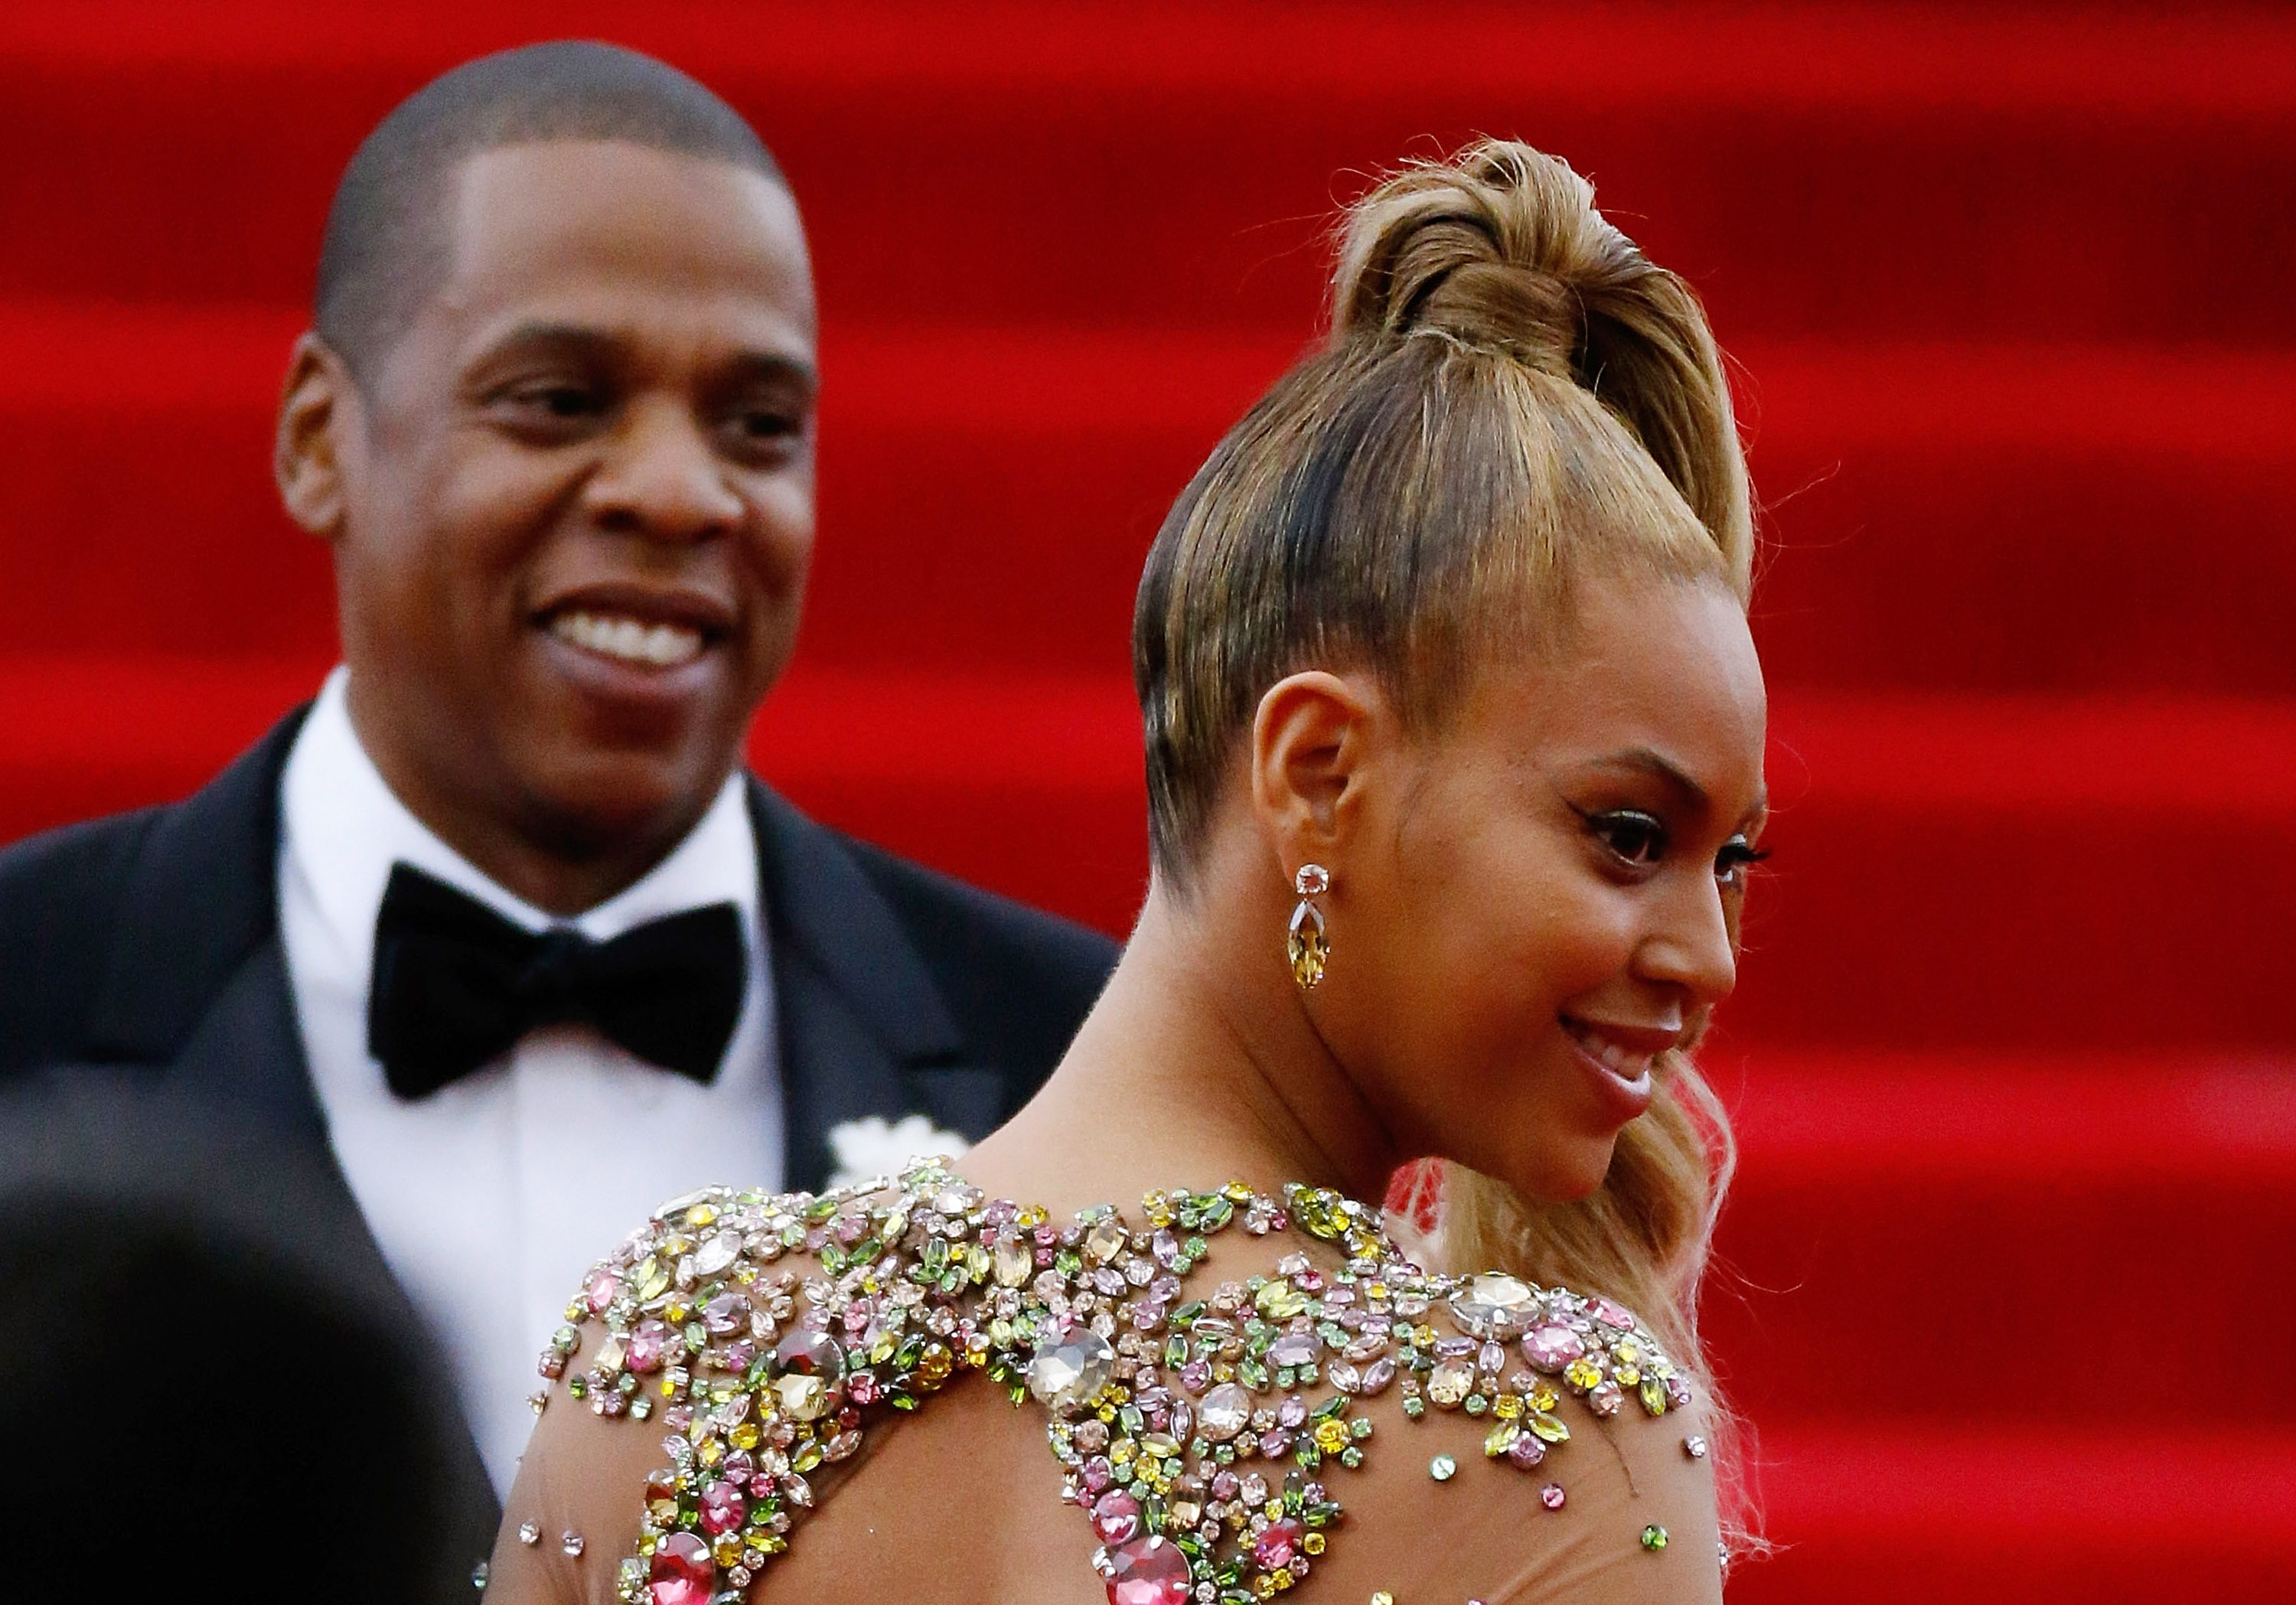 Jay Z & Beyonce Have Paid “Tens Of Thousands” In Protestors’ Bail Money